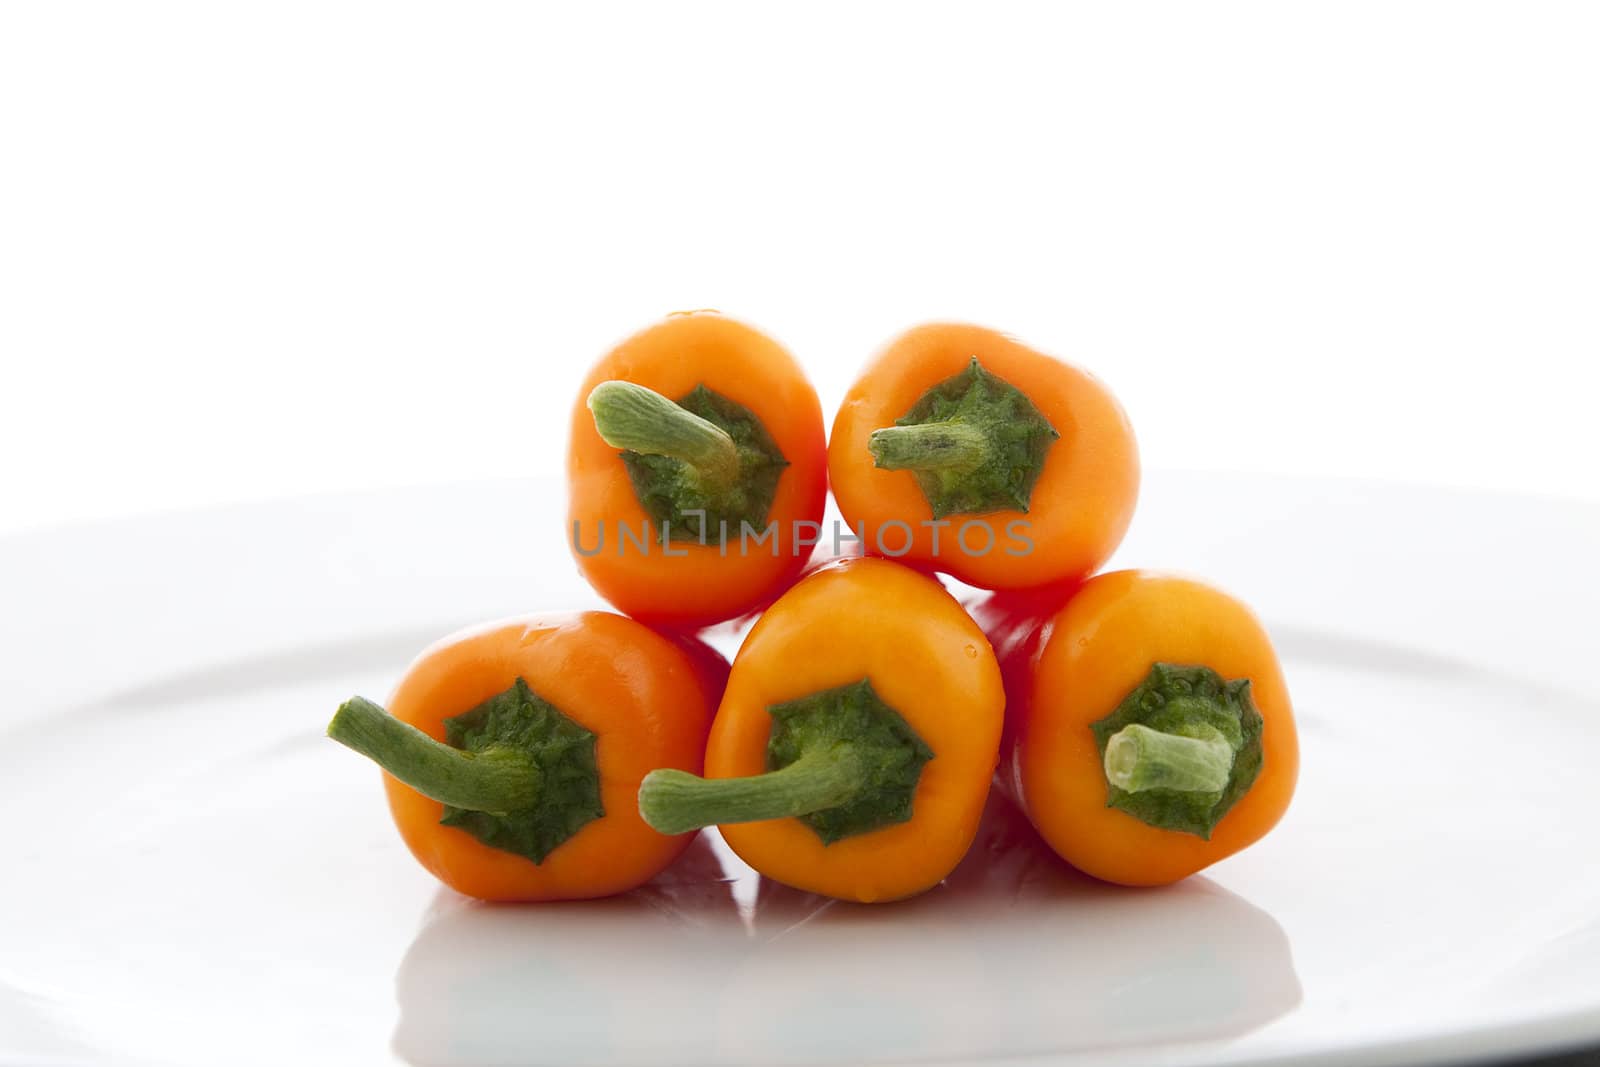 Five orange peppers on white plate.